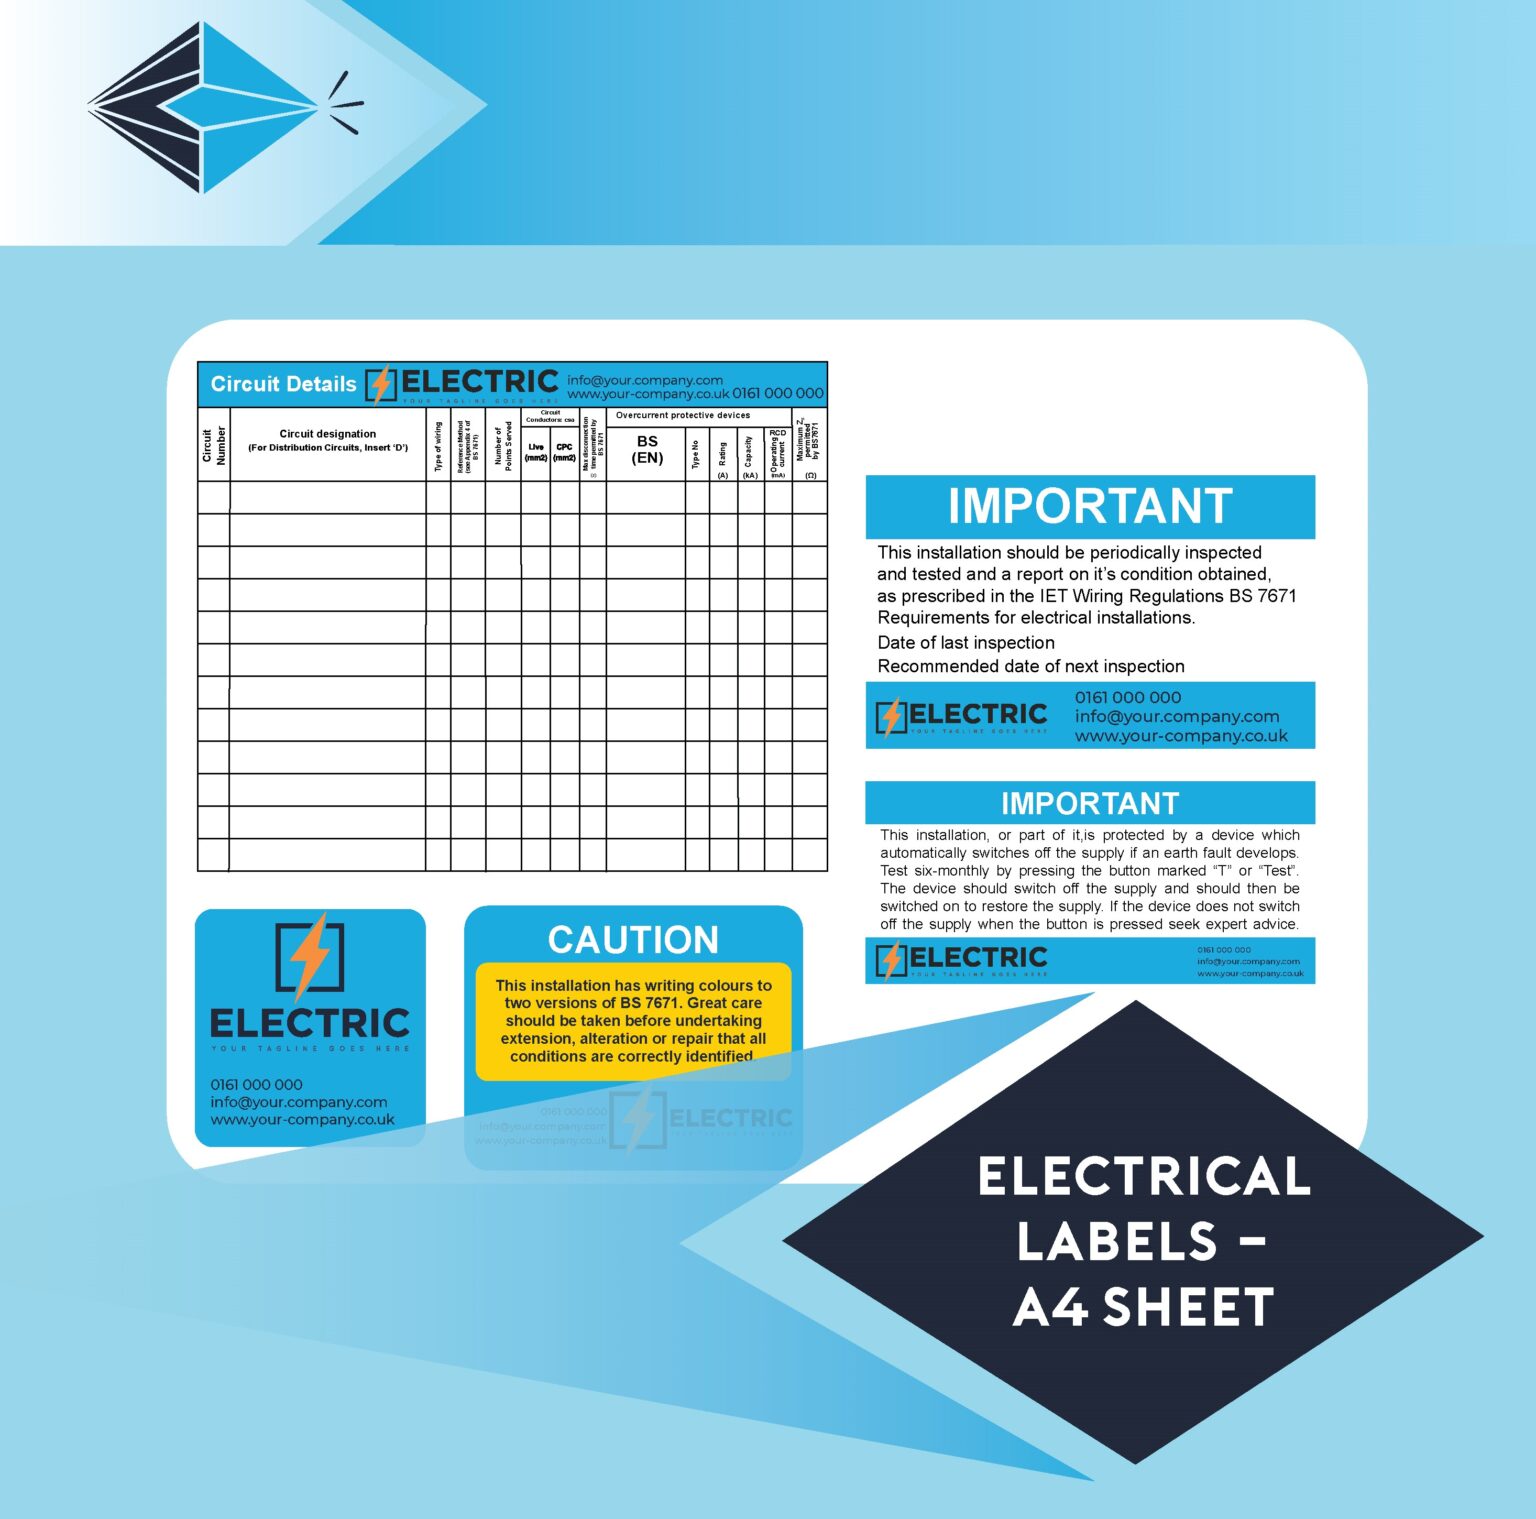 A4-Sheet-Electrical-Labels-You-Design